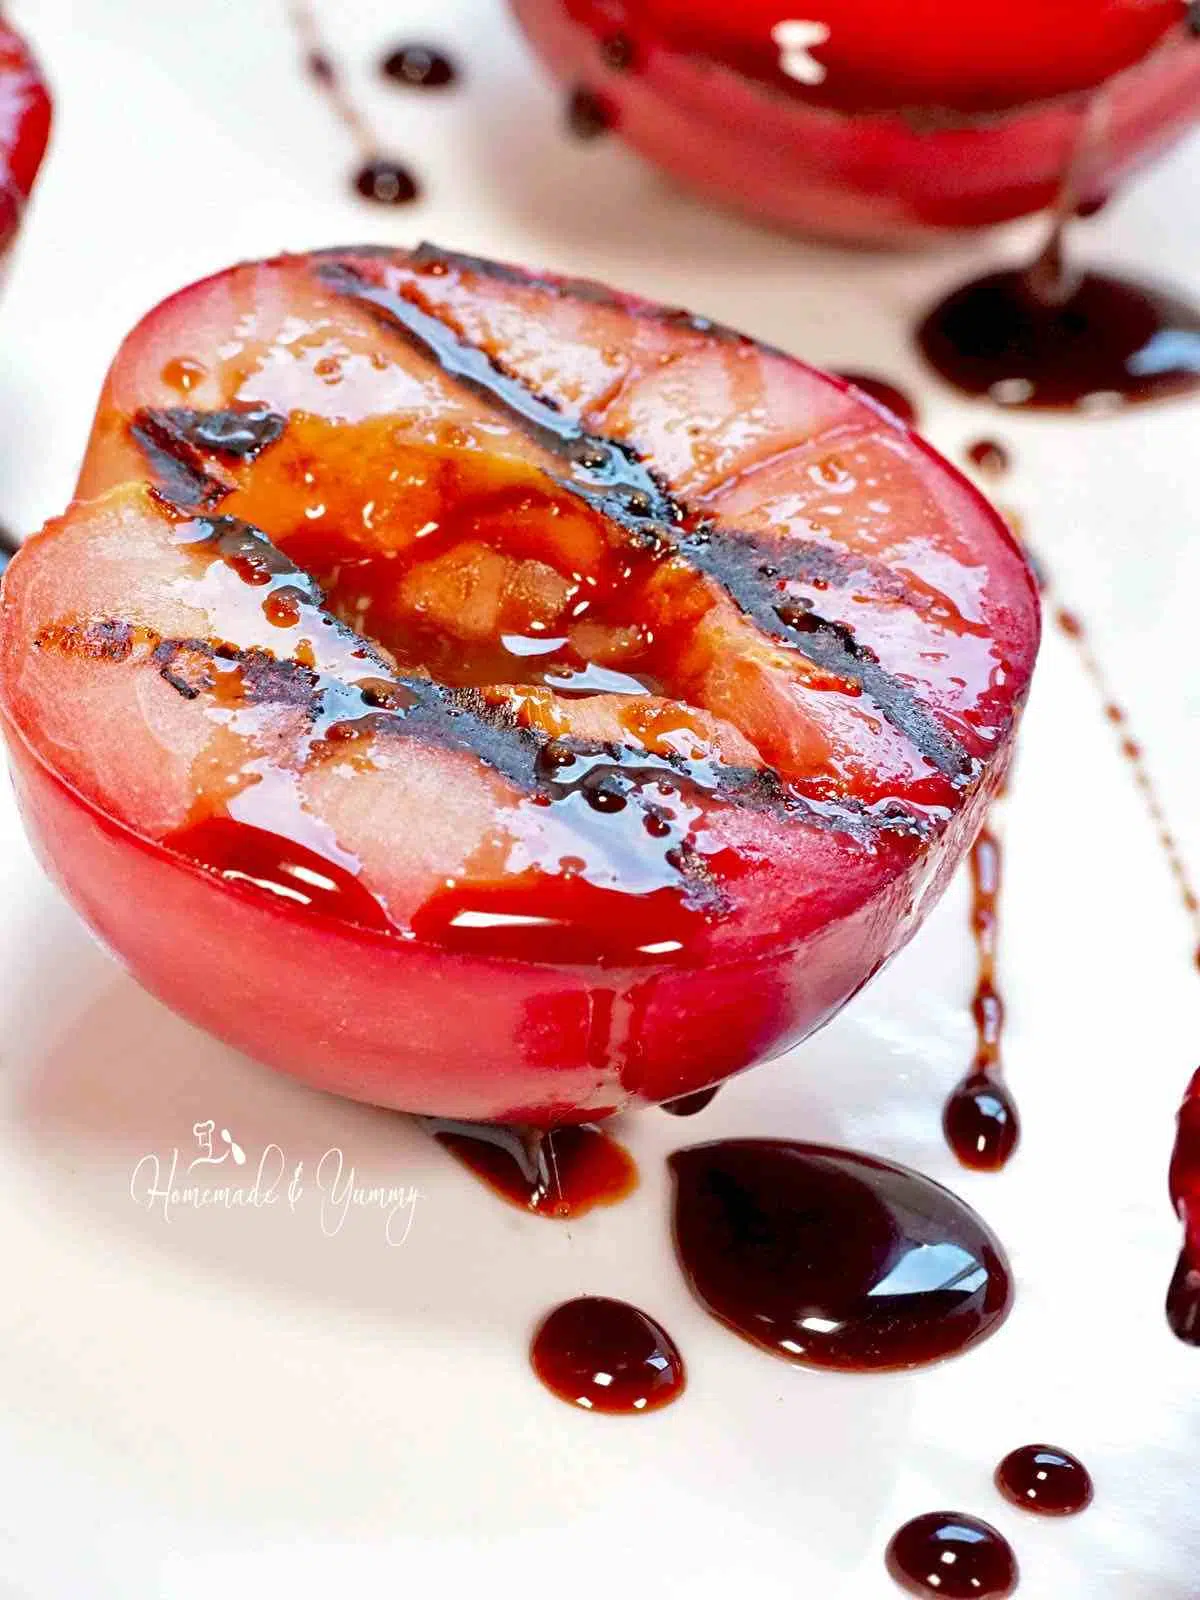 Red plum grilled with a chocolate honey glaze.